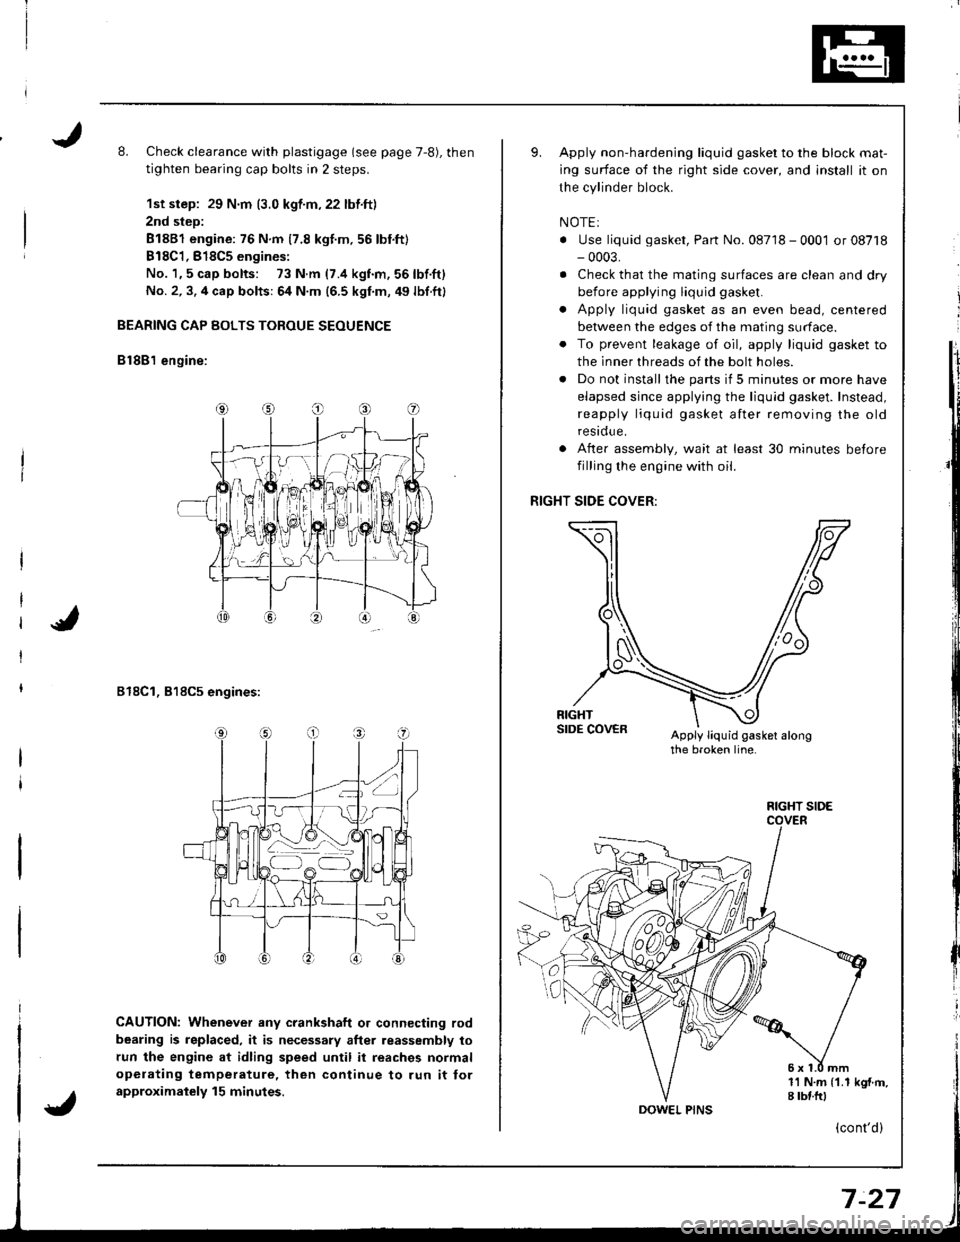 HONDA INTEGRA 1998 4.G Owners Manual L Check clearance with plastigage (see page 7,8), then
tighten bearing cap bolts in 2 steps.
1st step: 29 N.m (3.0 kgf.m,22 lbf.ft)
2nd step:
81881 engine: 76 N.m 17.8 kgt.m.56 lbnft)
B18C1,818C5 engi